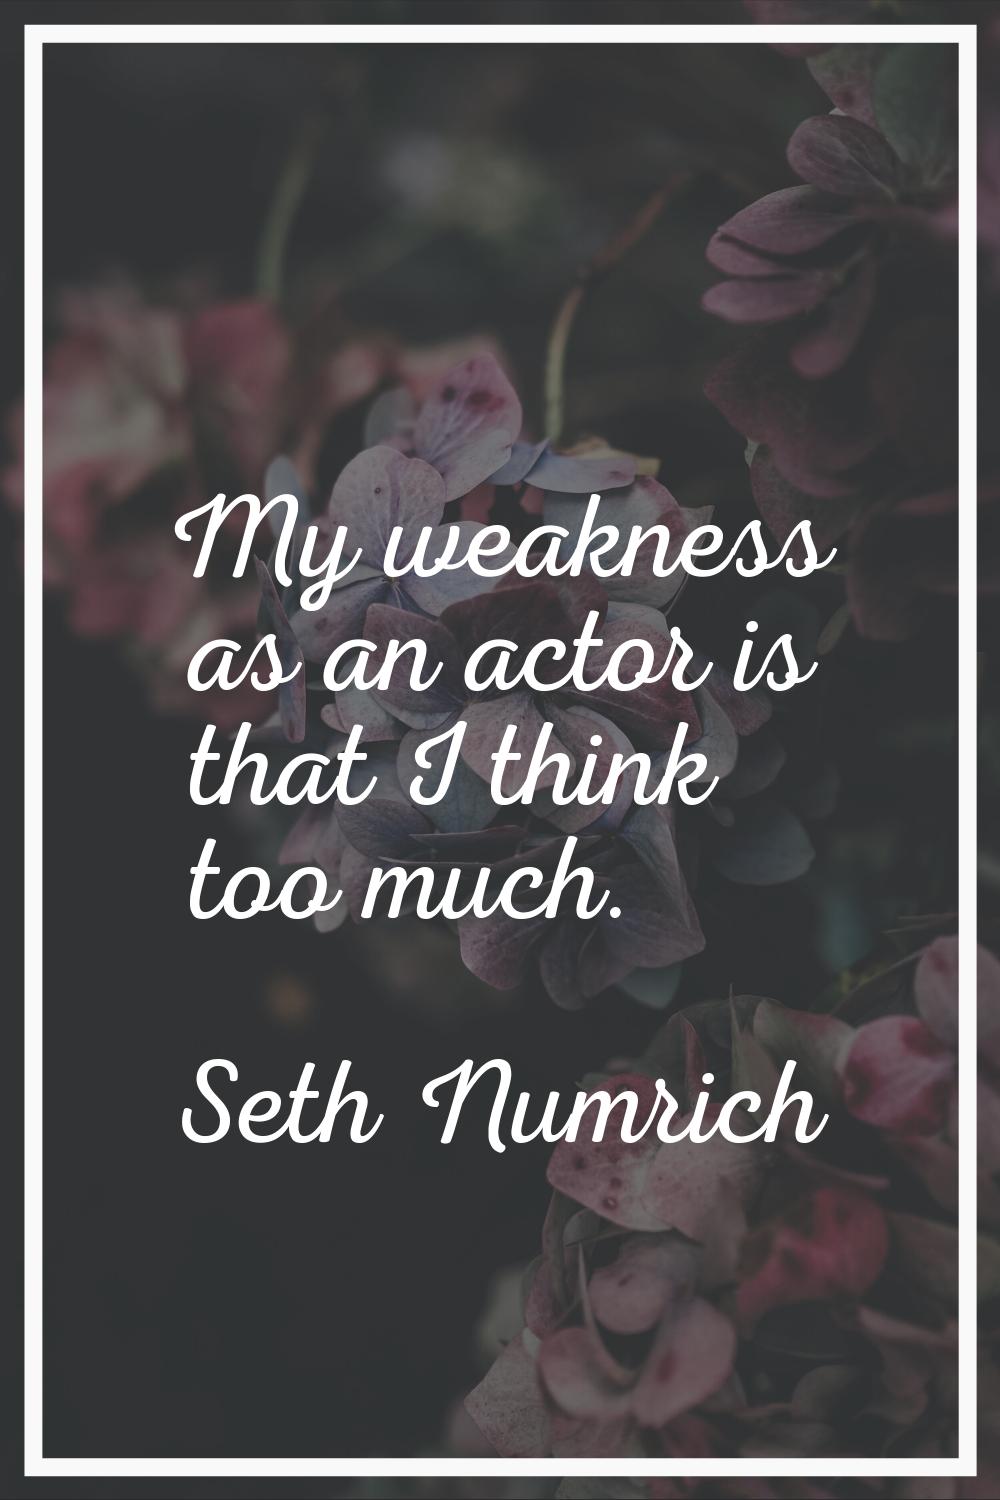 My weakness as an actor is that I think too much.